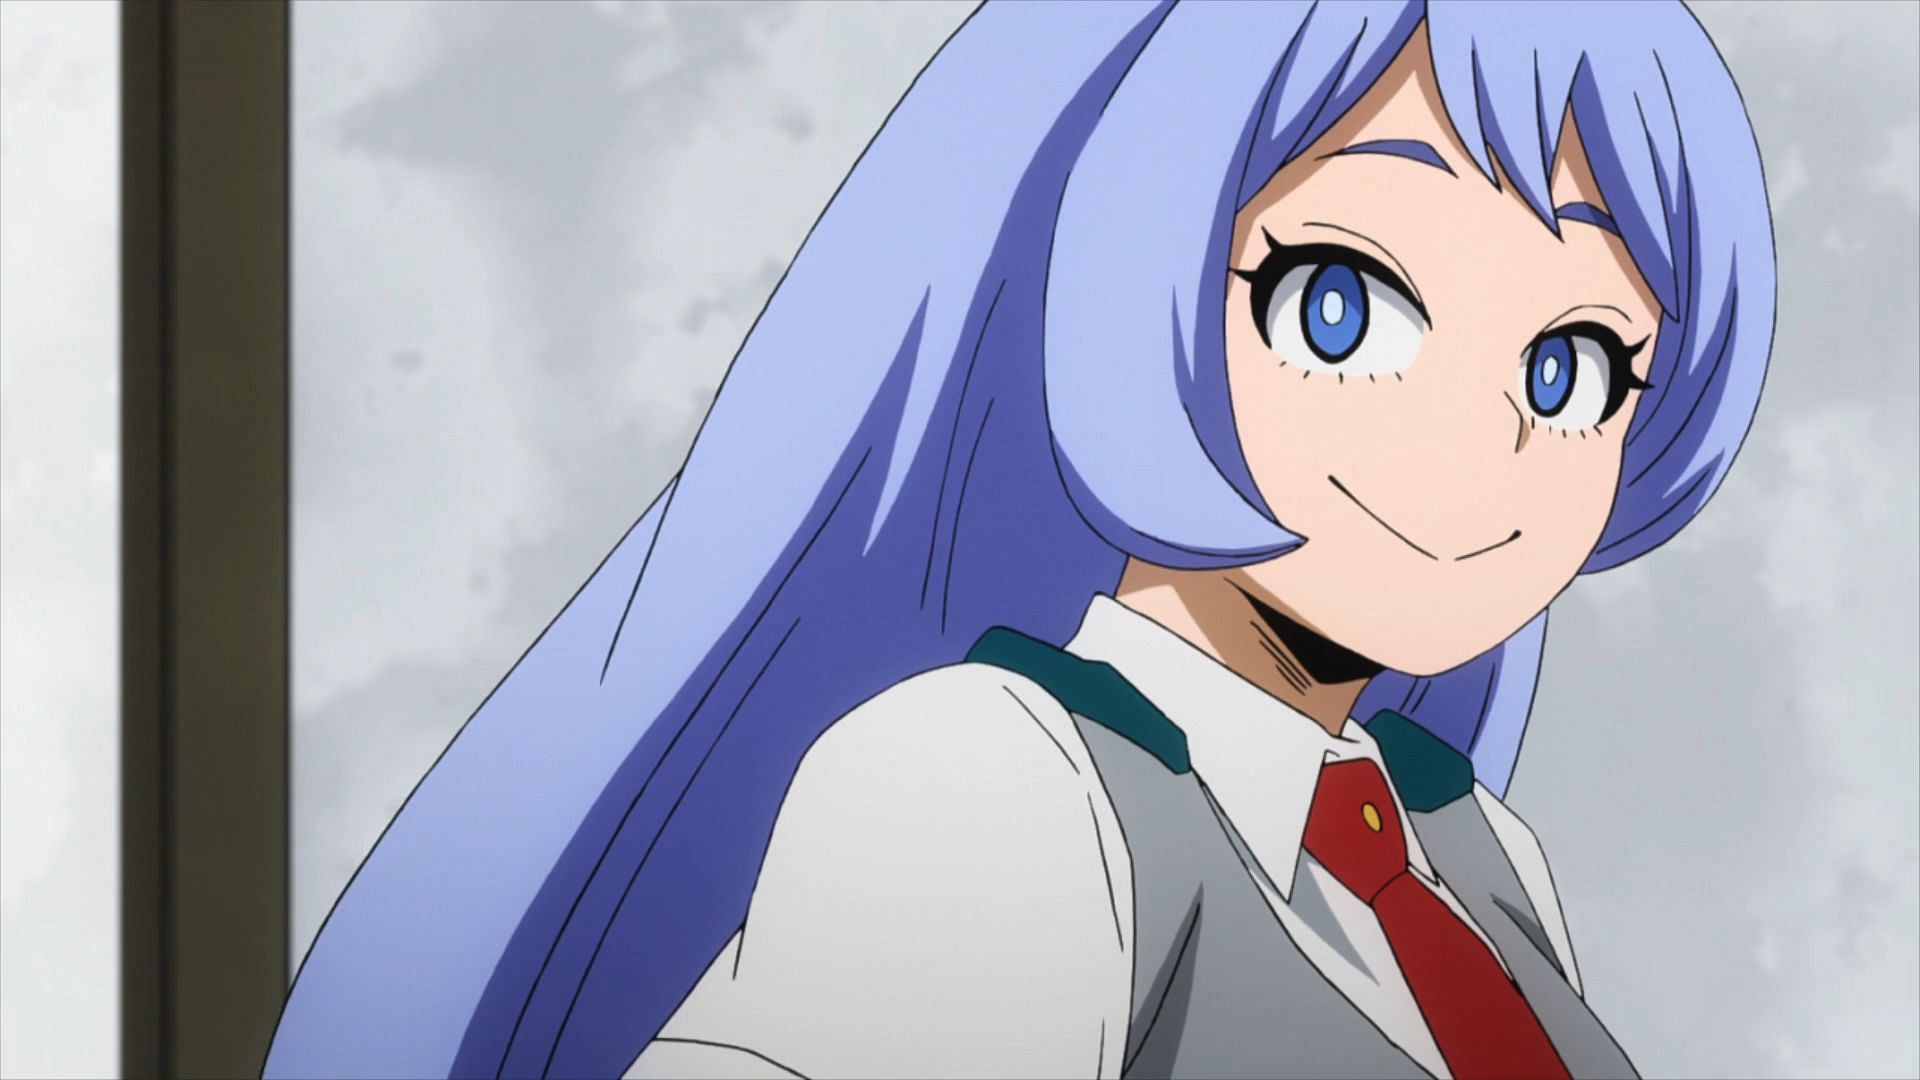 Nejire is usually smiling in her My Hero Academia appearances (Image via Bones)